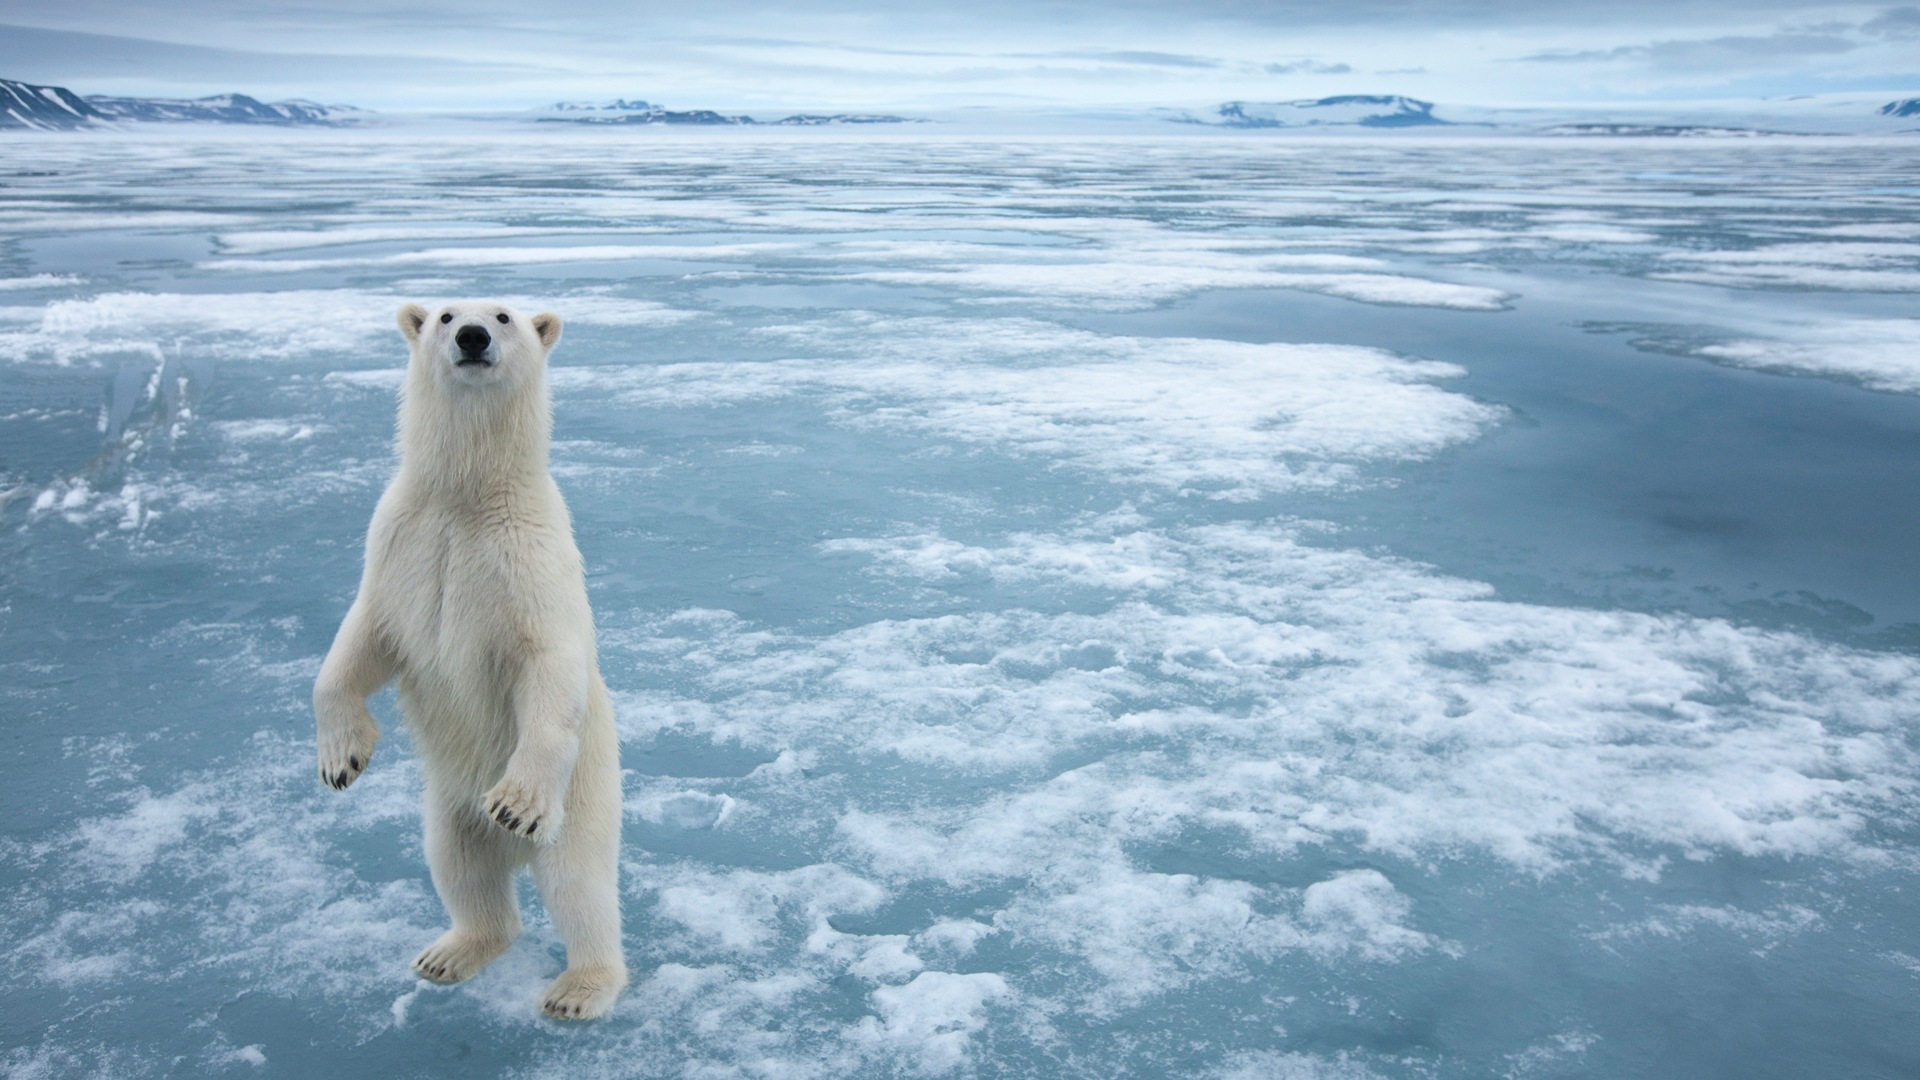 Windows 8 Wallpapers: Arctic, the nature ecological landscape, arctic animals #6 - 1920x1080